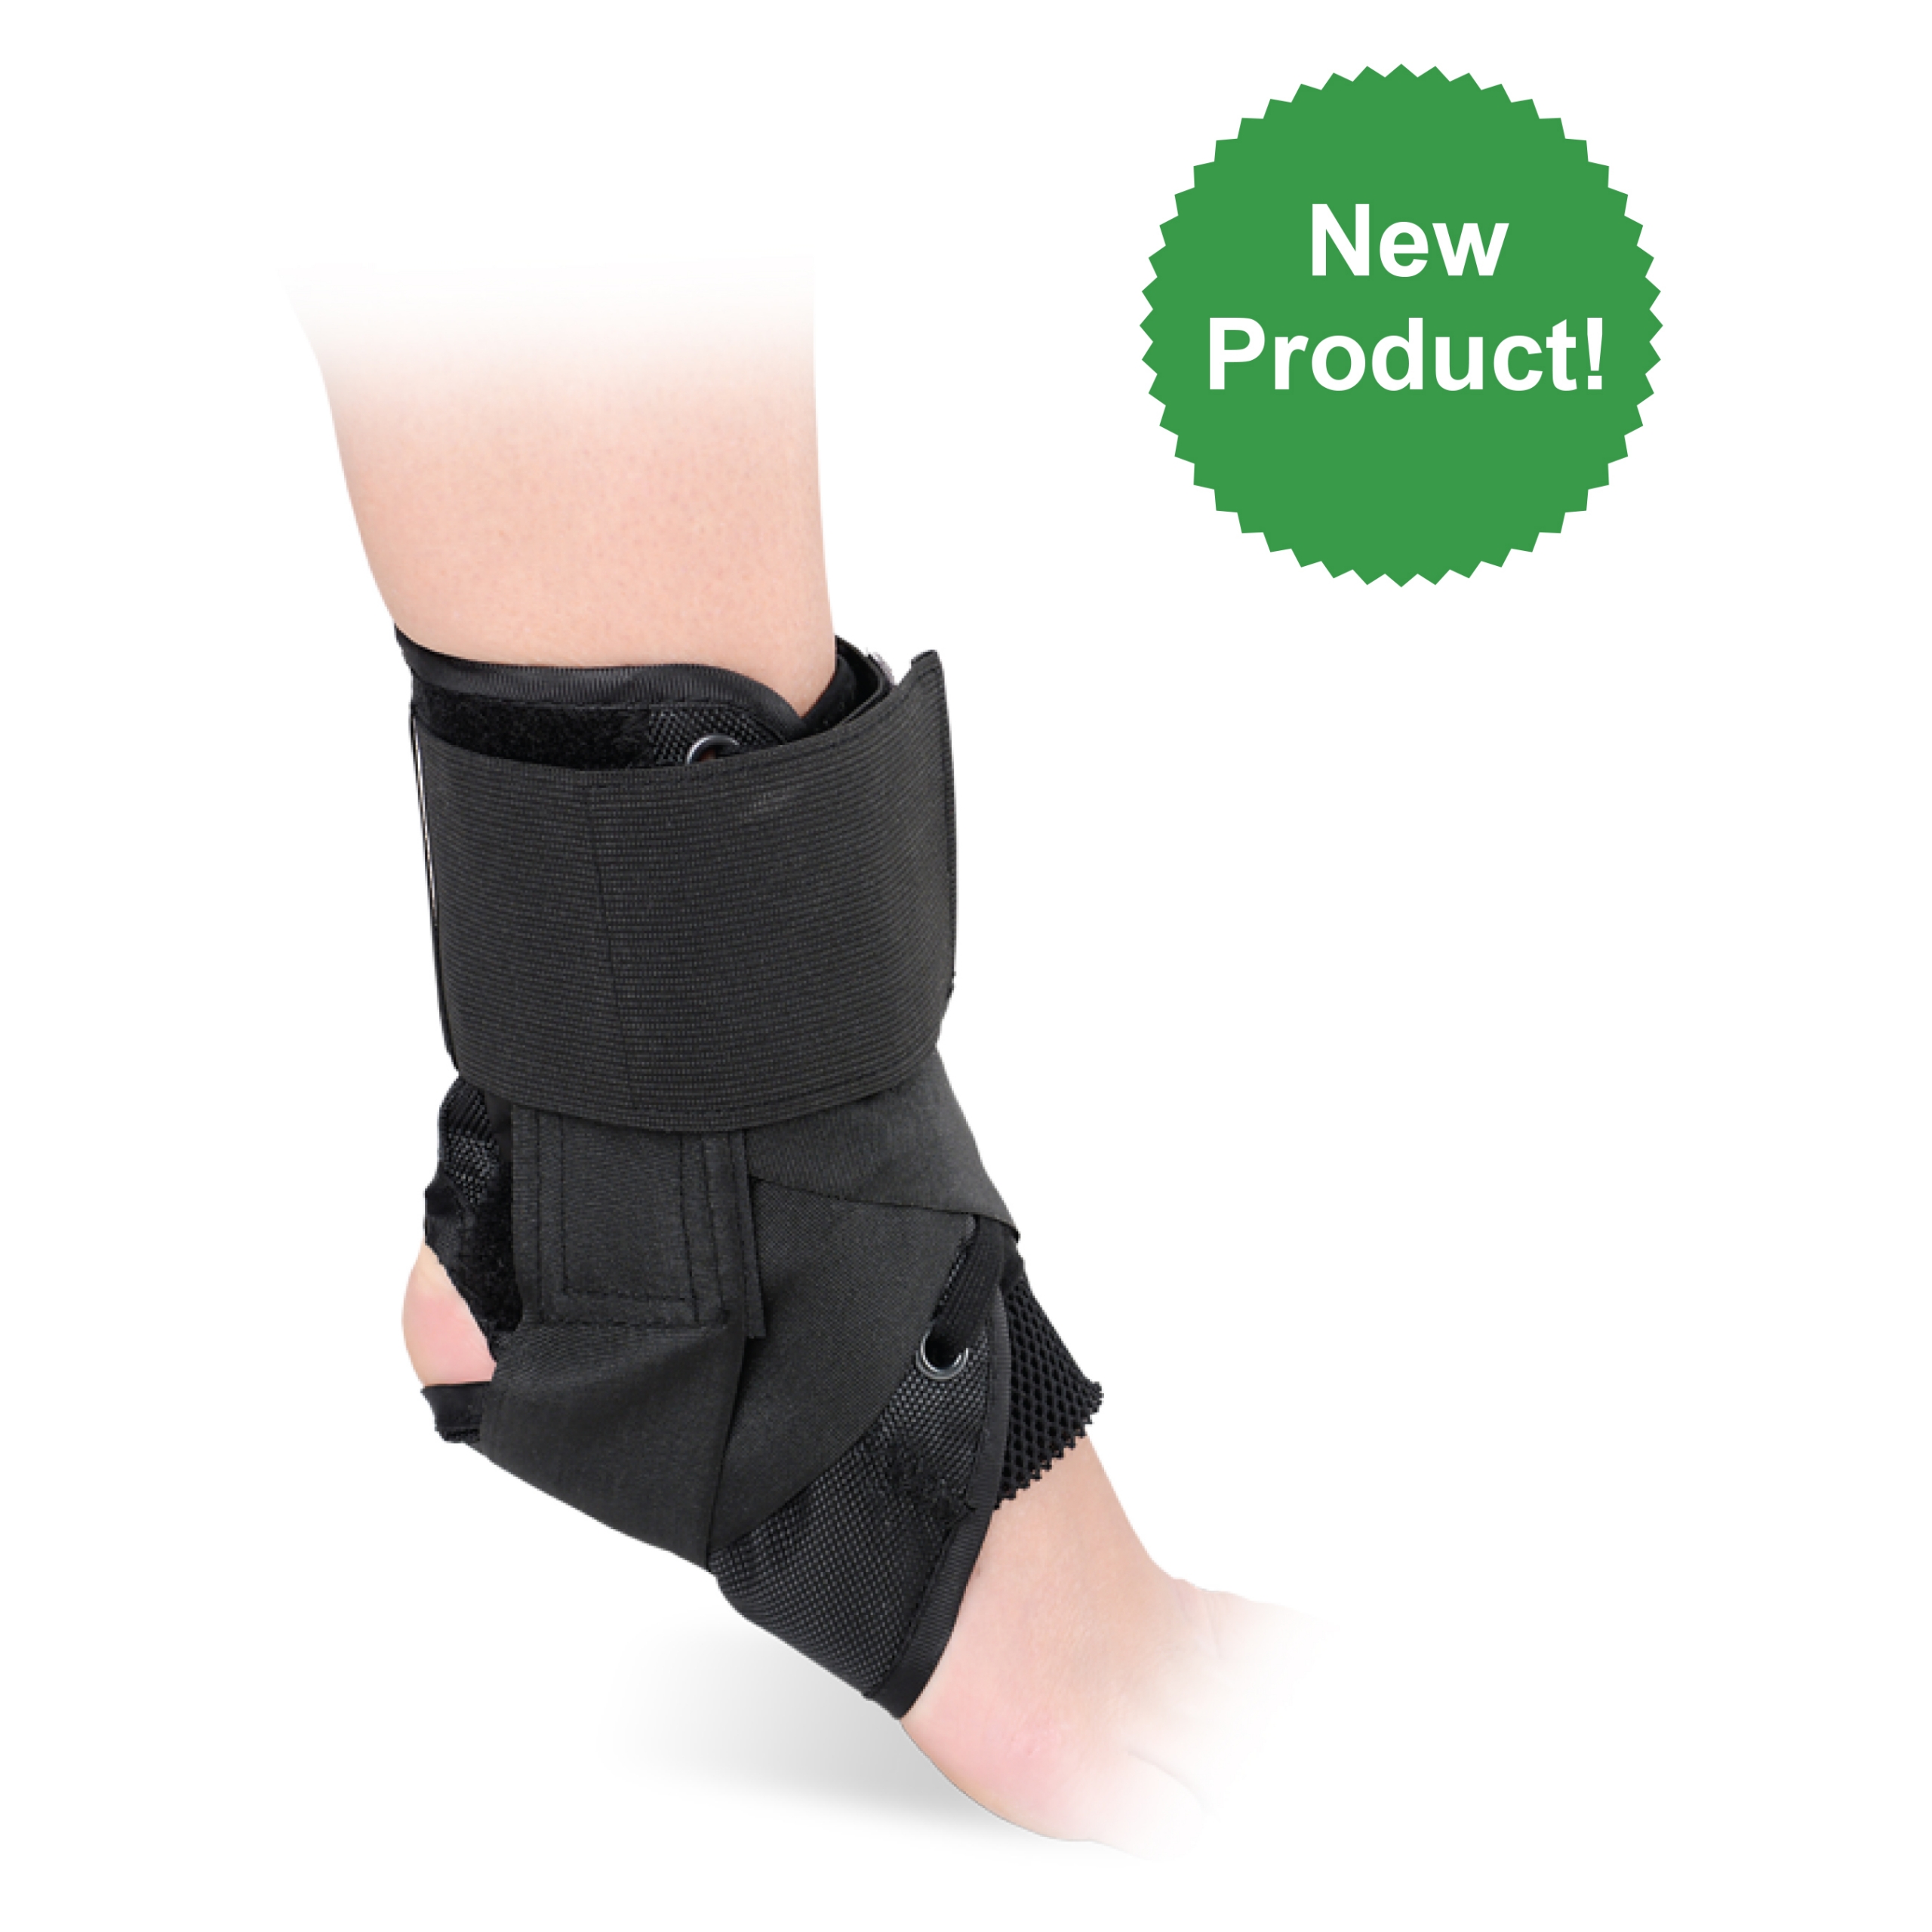 Quick Lace Ankle Brace SUGGESTED HCPC: L1902